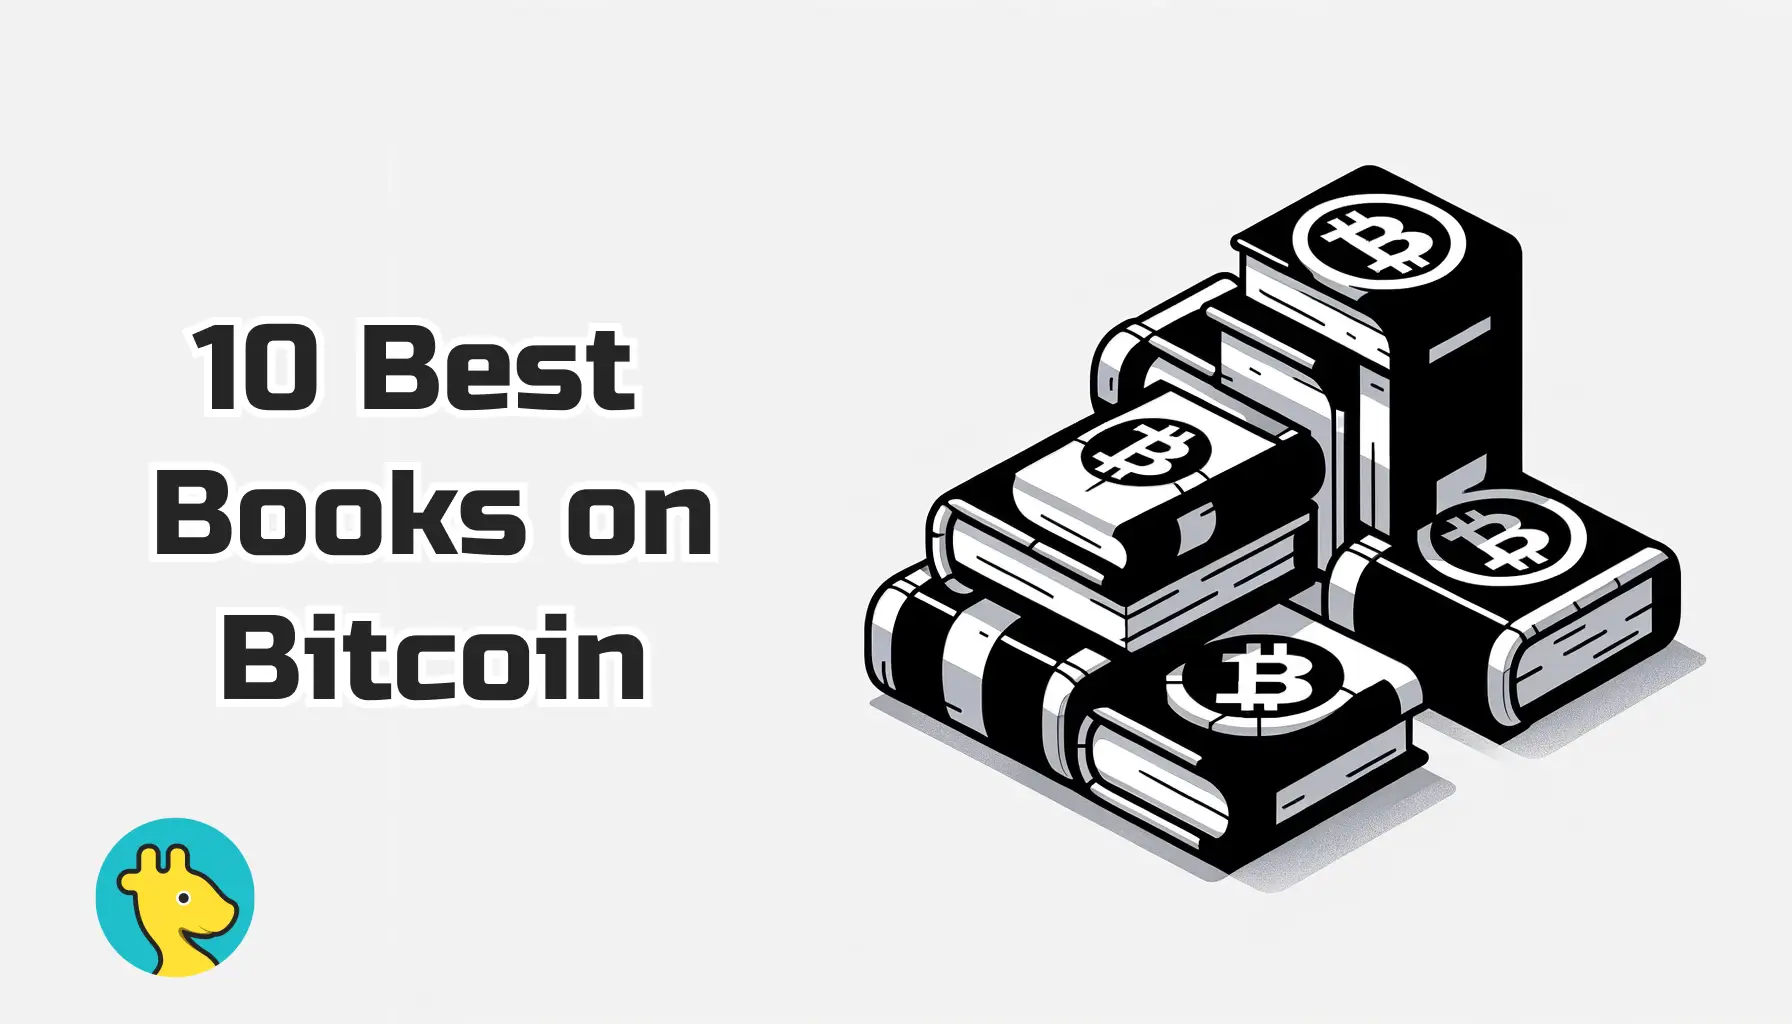 Explore the 10 Best Books on Bitcoin